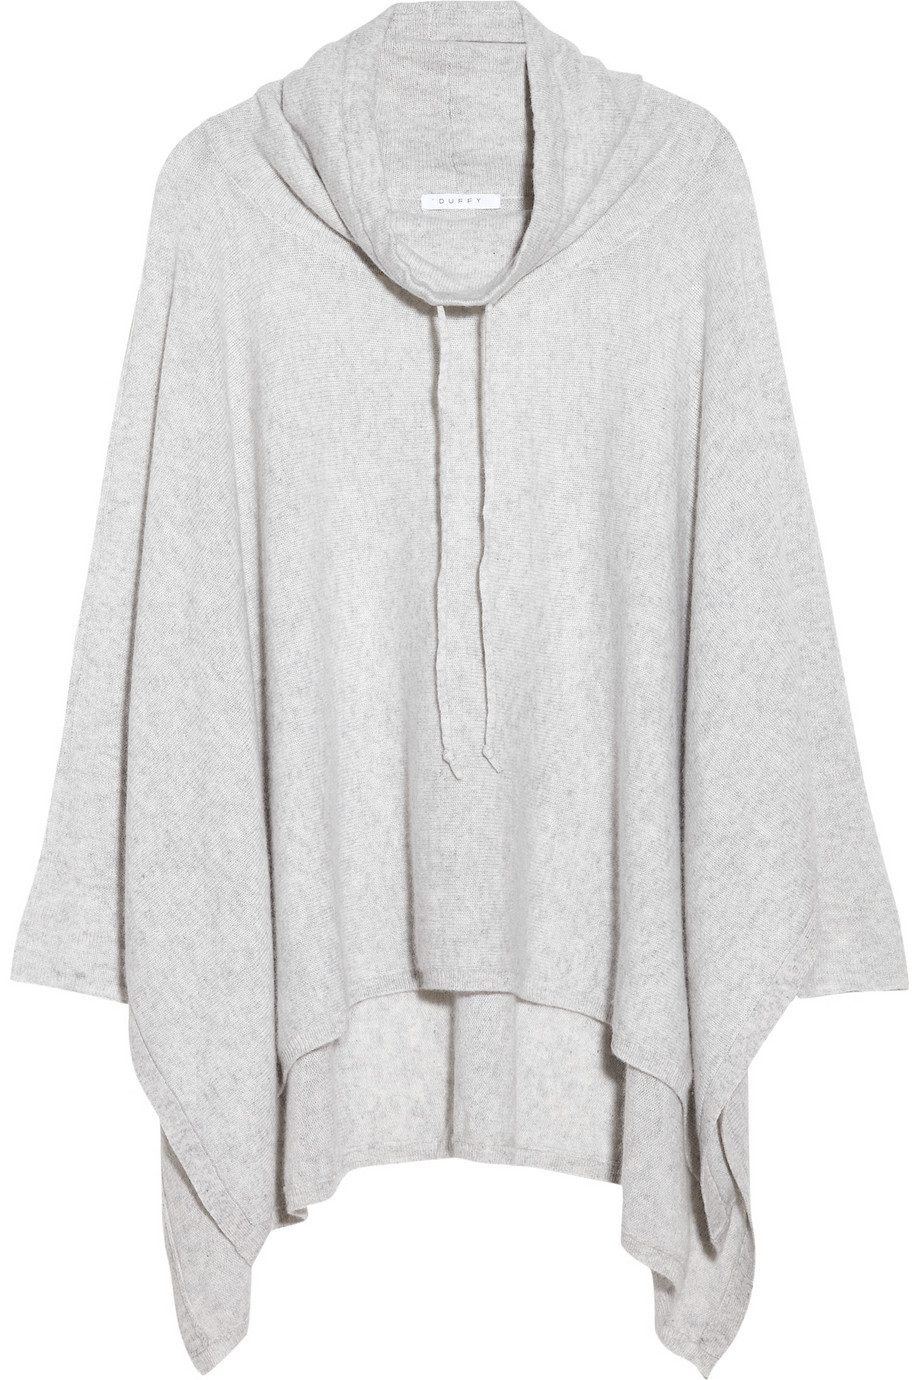 Duffy Cashmere Poncho Sweater in Gray | Lyst